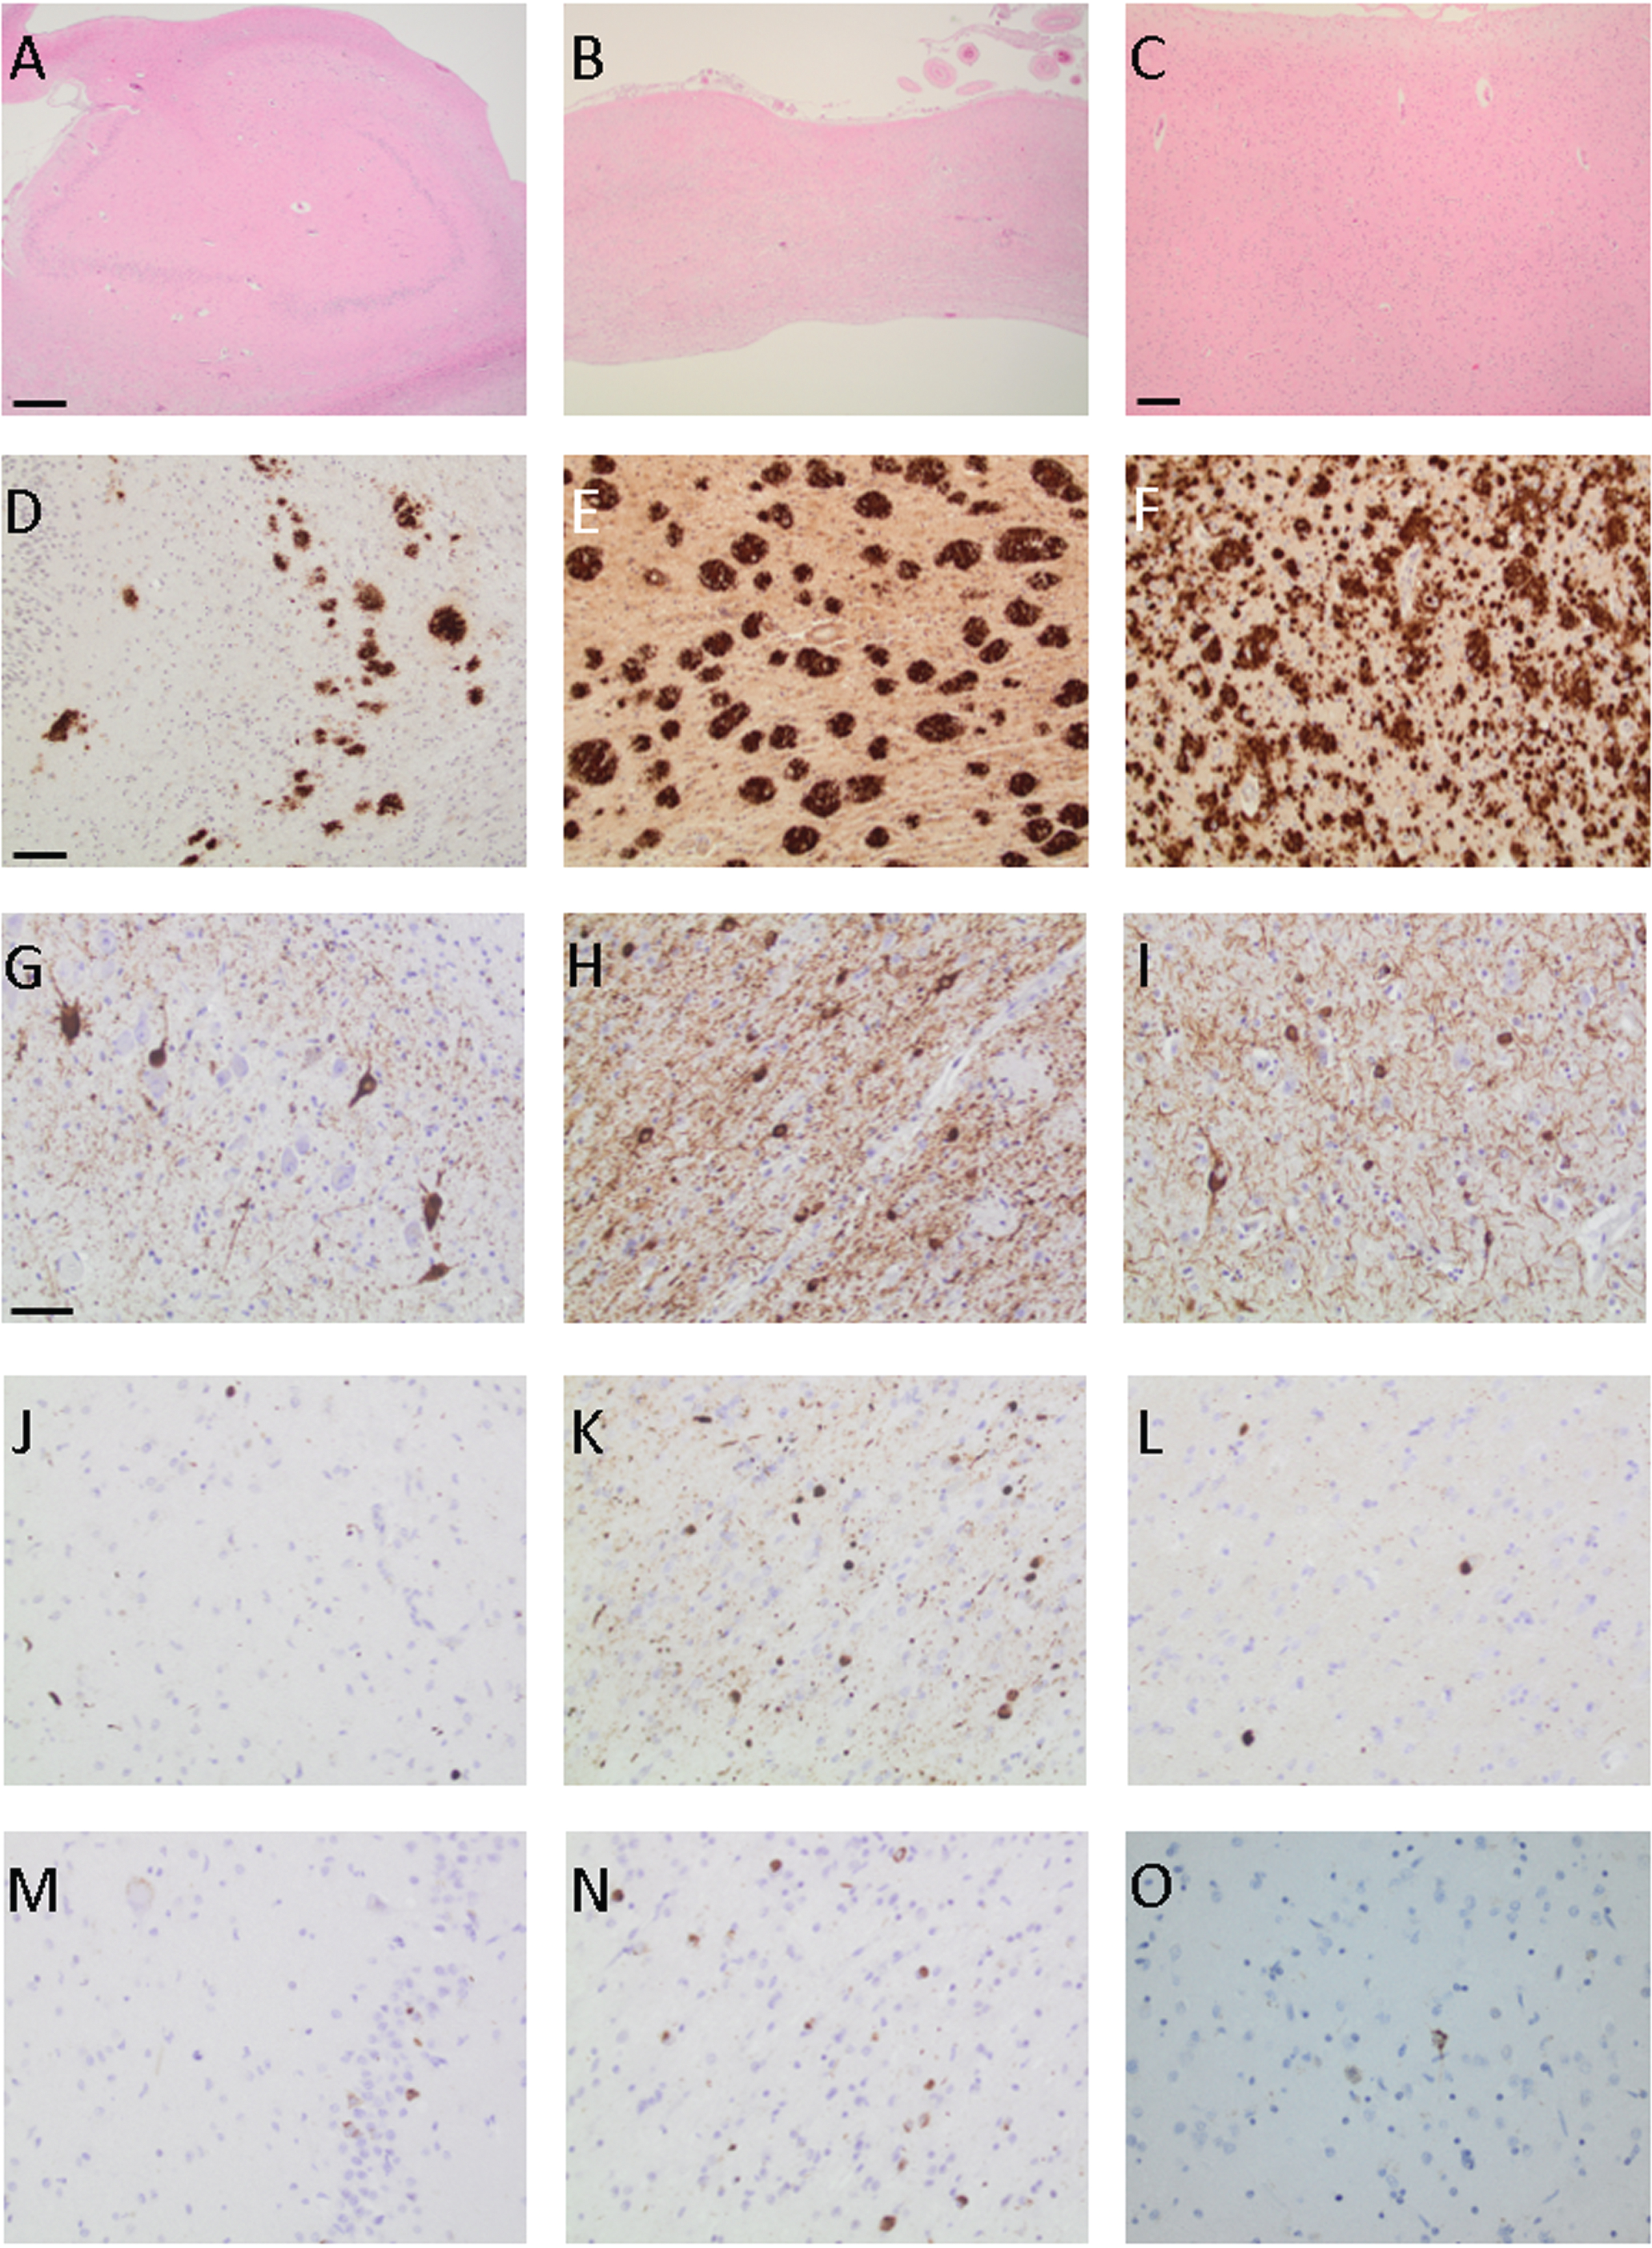 Photomicrographs of brain samples from a PSEN1 G206R mutation carrier from the hippocampus (A, D, G, J, and M), remnants of amygdala (B, E, H, K, and N) and neocortex (C, F, I, L and O) when applying hematoxylin-eosin staining (A–C) and antibodies towards total amyloid β (D–F), hyperphosphorylated τ (G–I), α-synuclein (J–L), and transactive DNA binding protein 43 (M–O). Bar in A-B 500μm, C 200μm, D–F 100μm, and G–O 50μm.